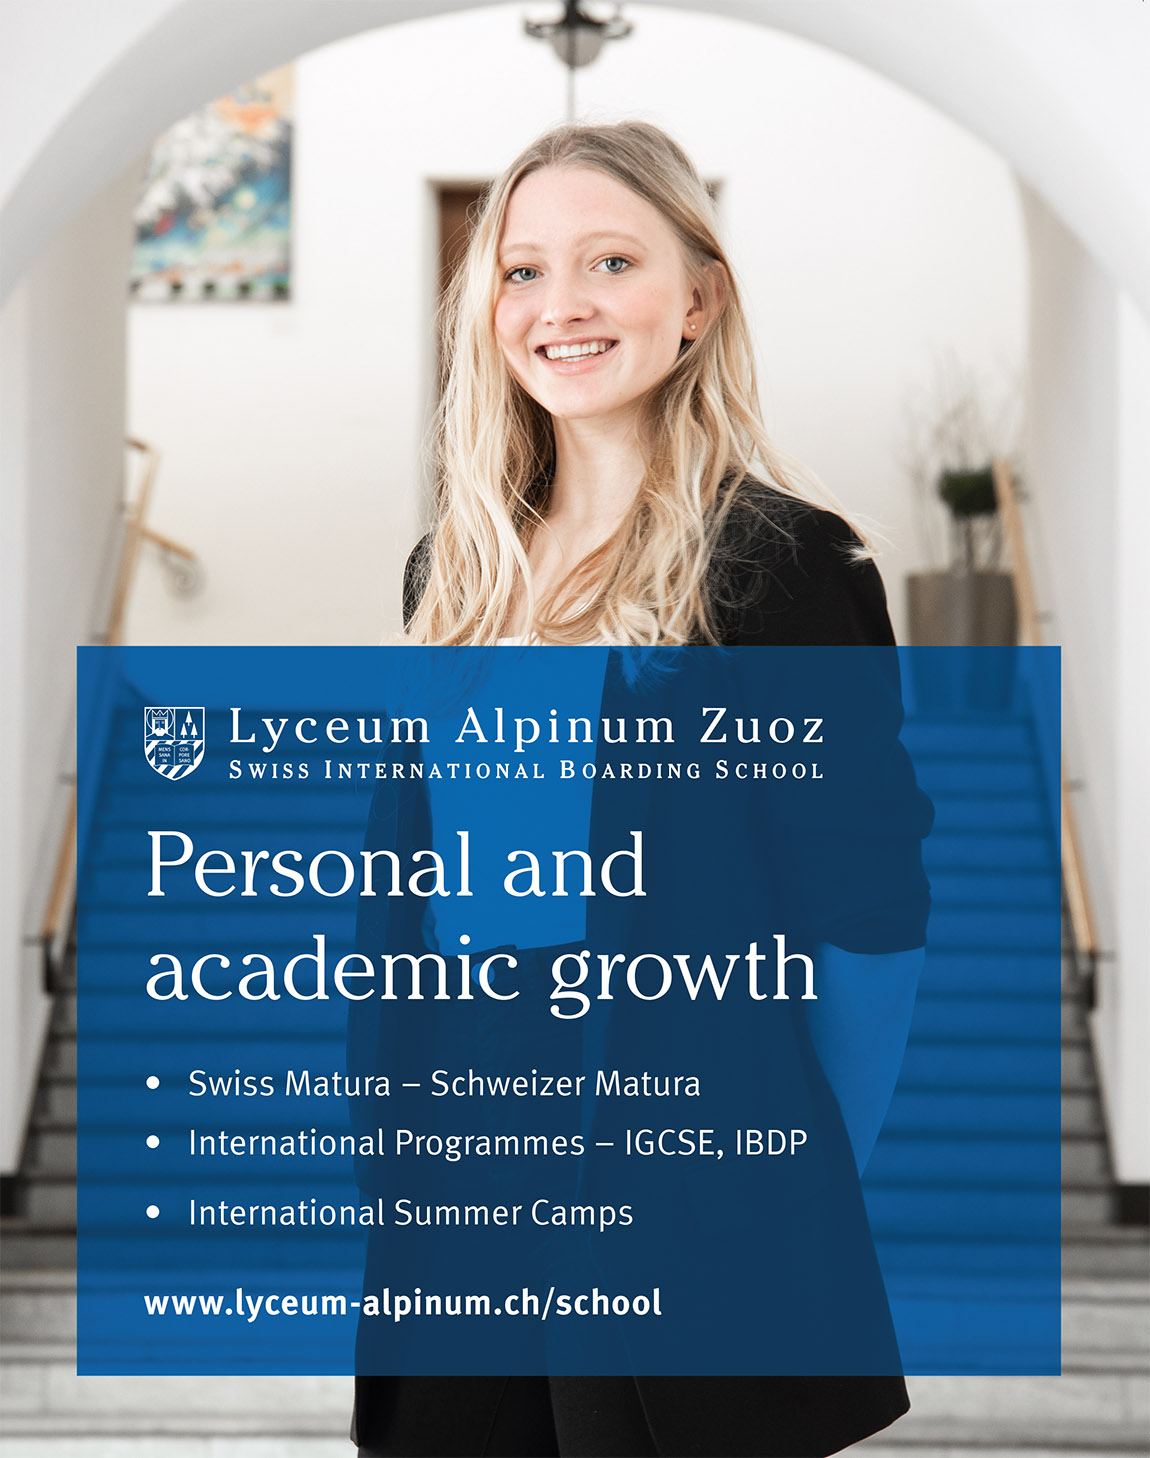 Lyceum Alpinum Zuoz: A GLOBAL VISION WITH STRONG LOCAL ROOTS